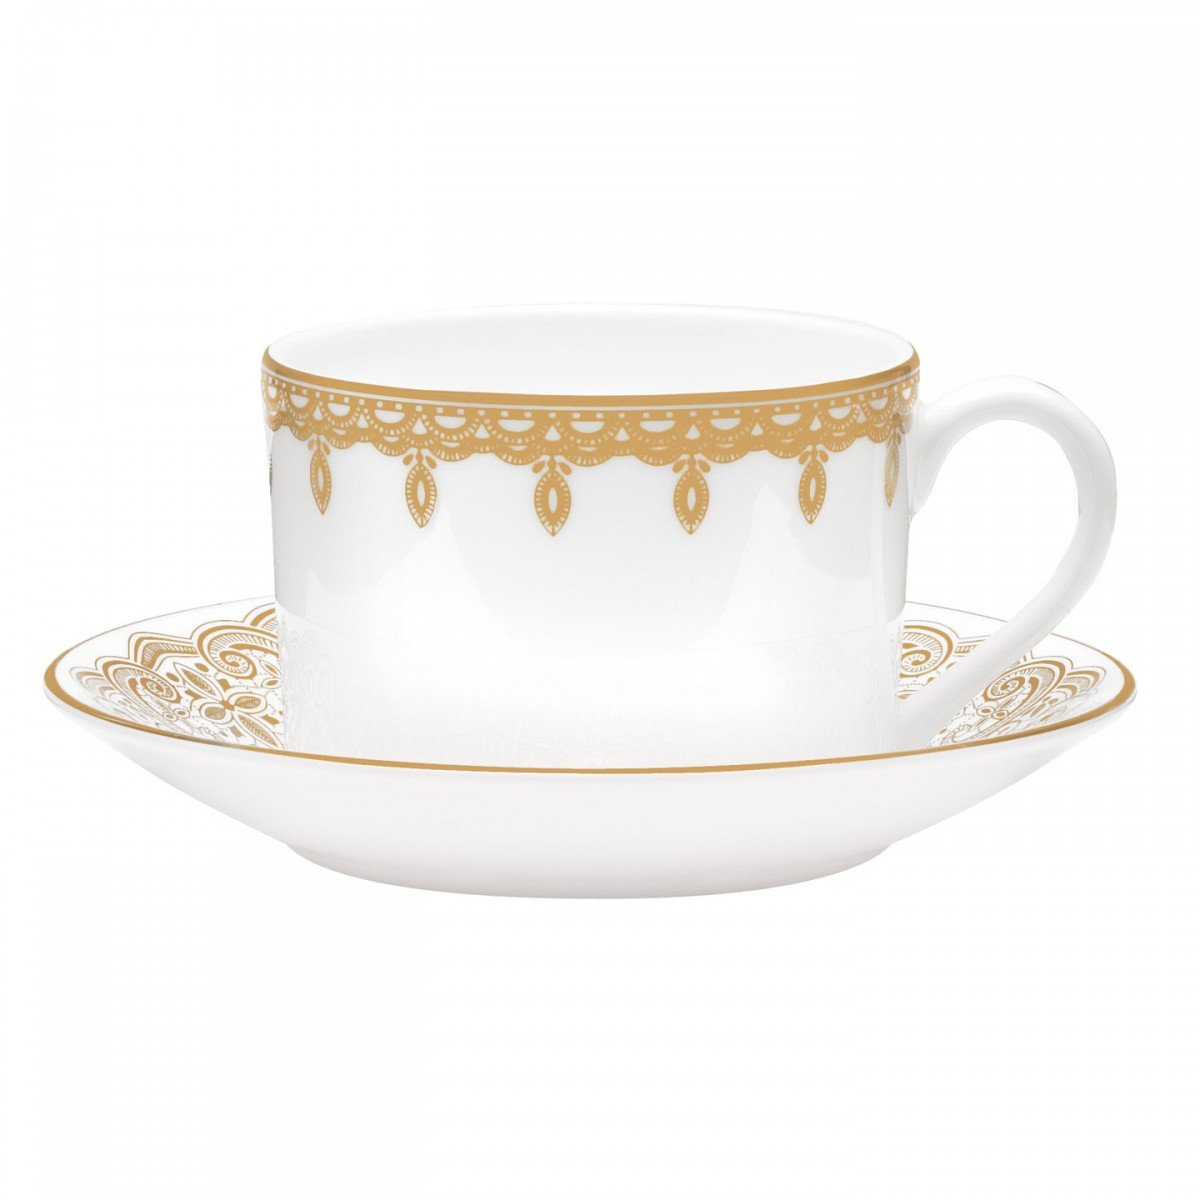 WATERFORD Lismore Lace Gold Teacup & saucer